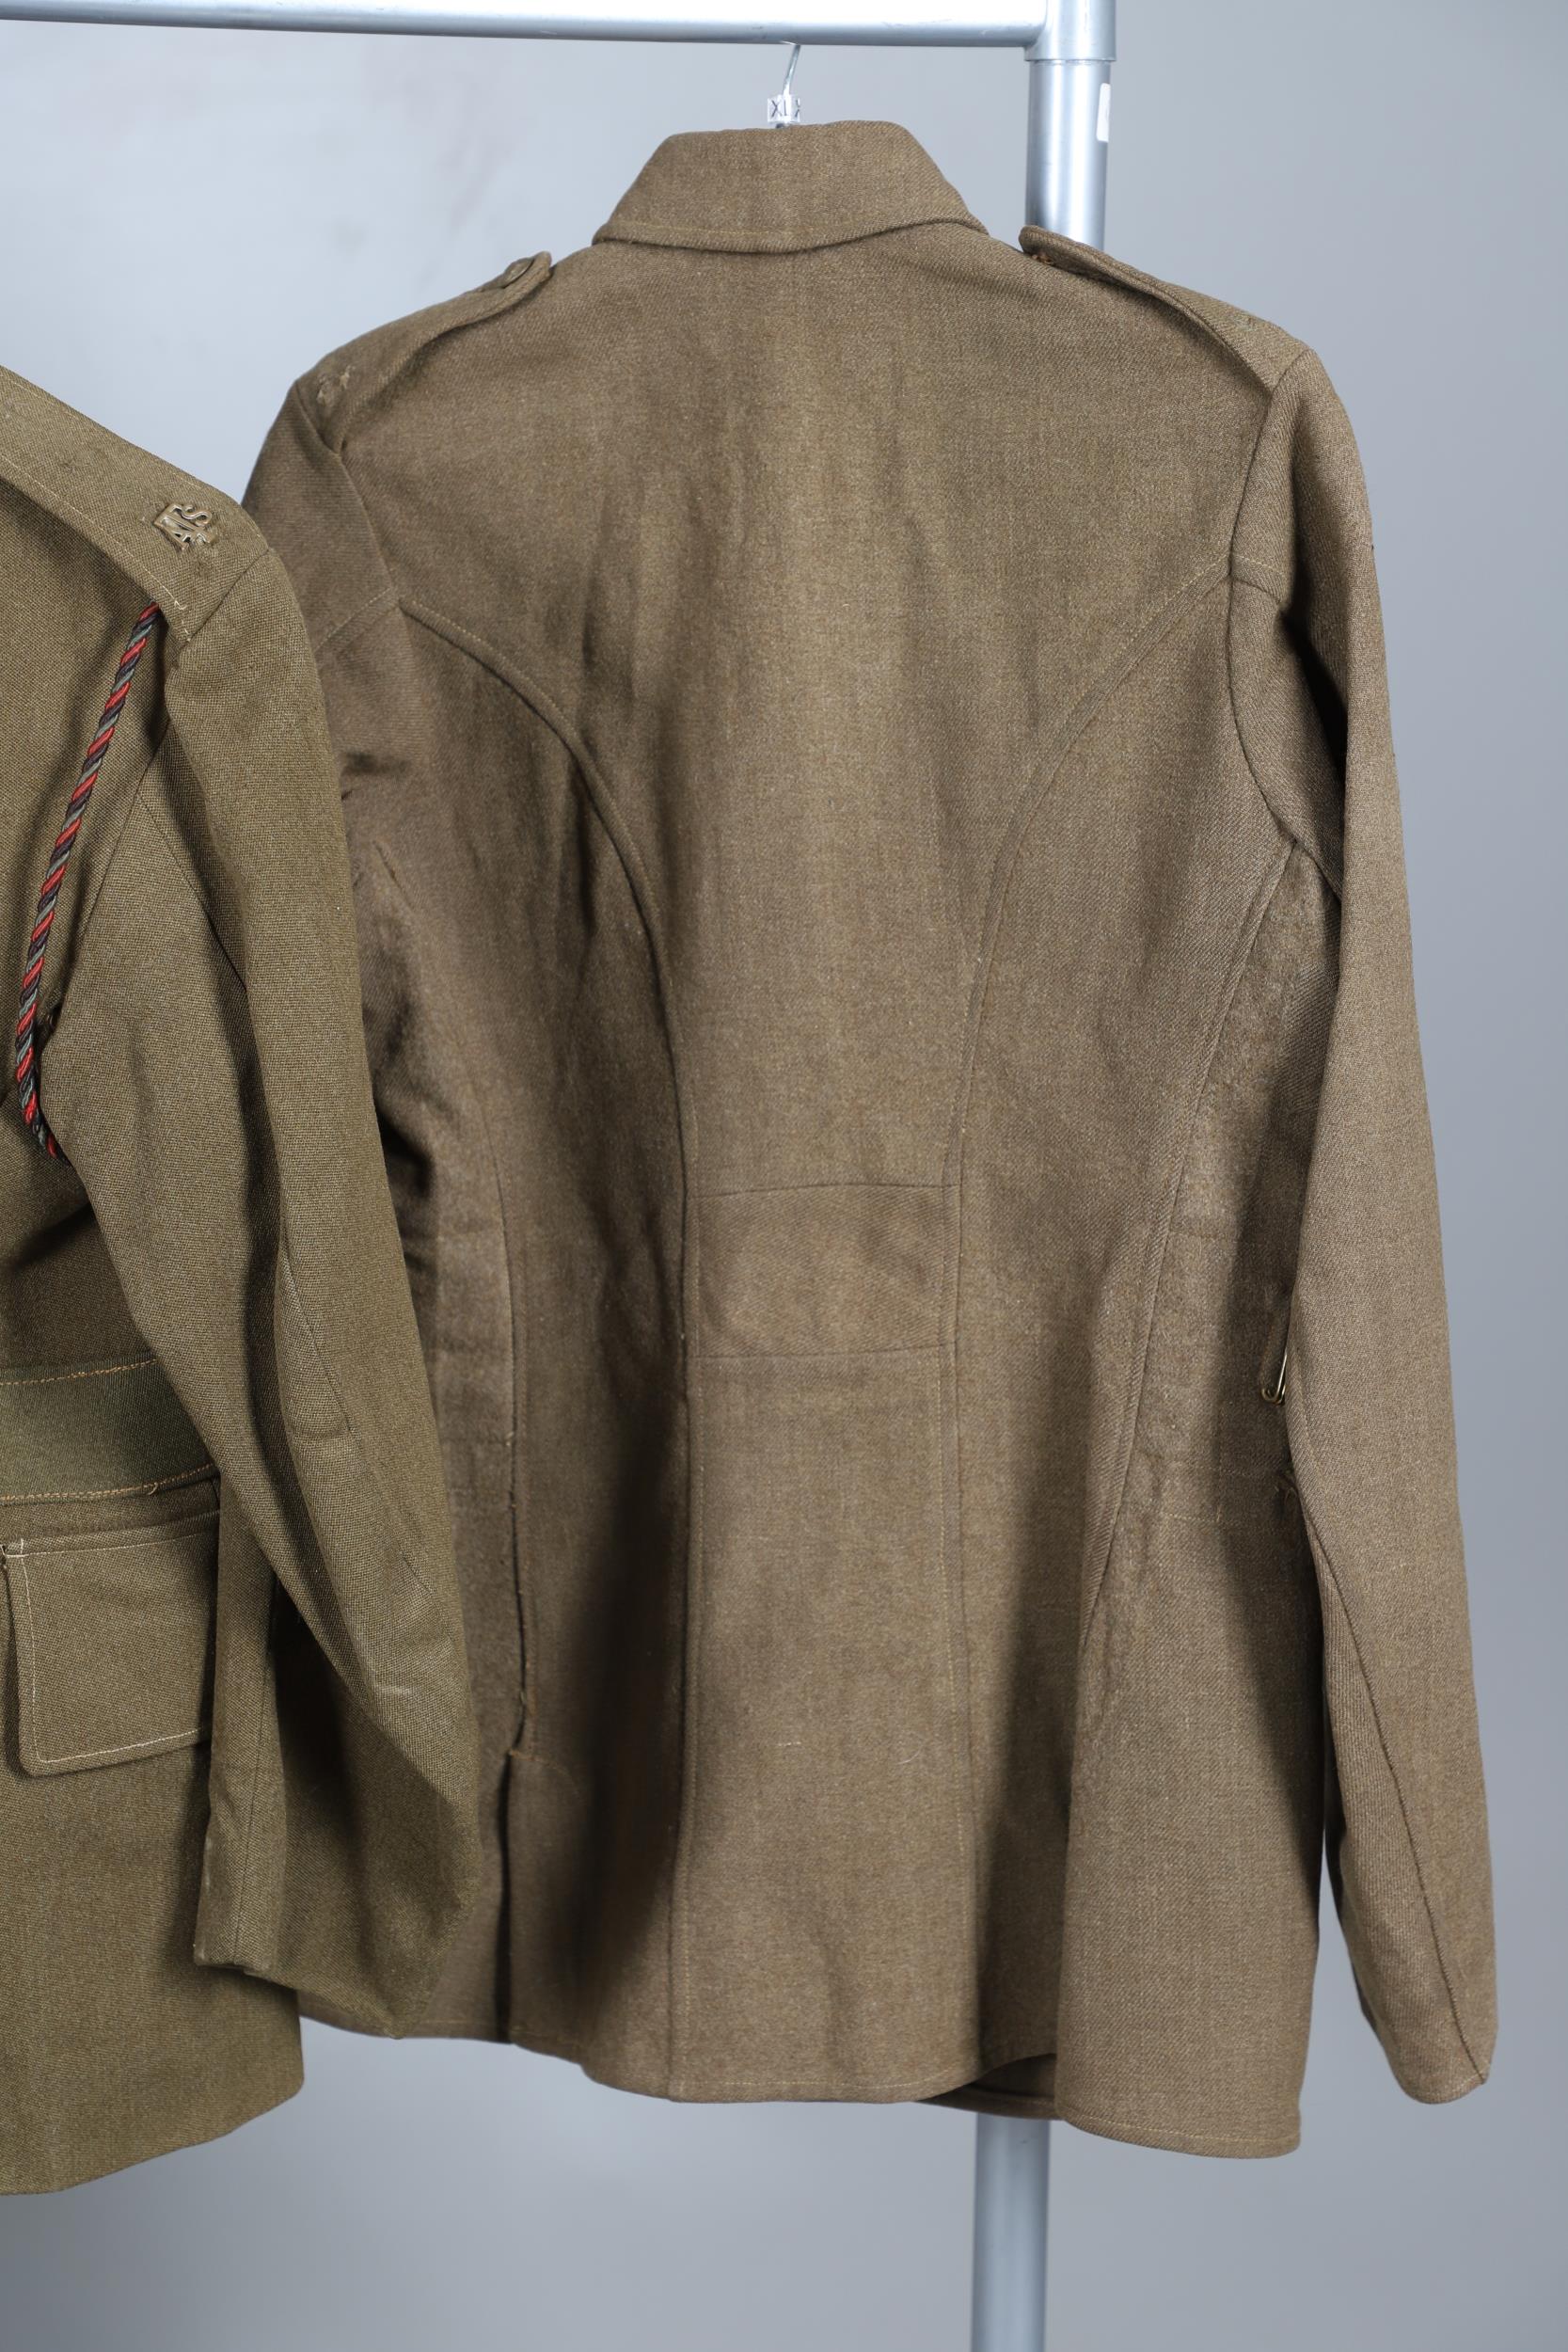 THREE 1922 PATTERN OR SIMILAR JACKETS WITH GENERAL SERVICE BUTTONS. - Image 12 of 12